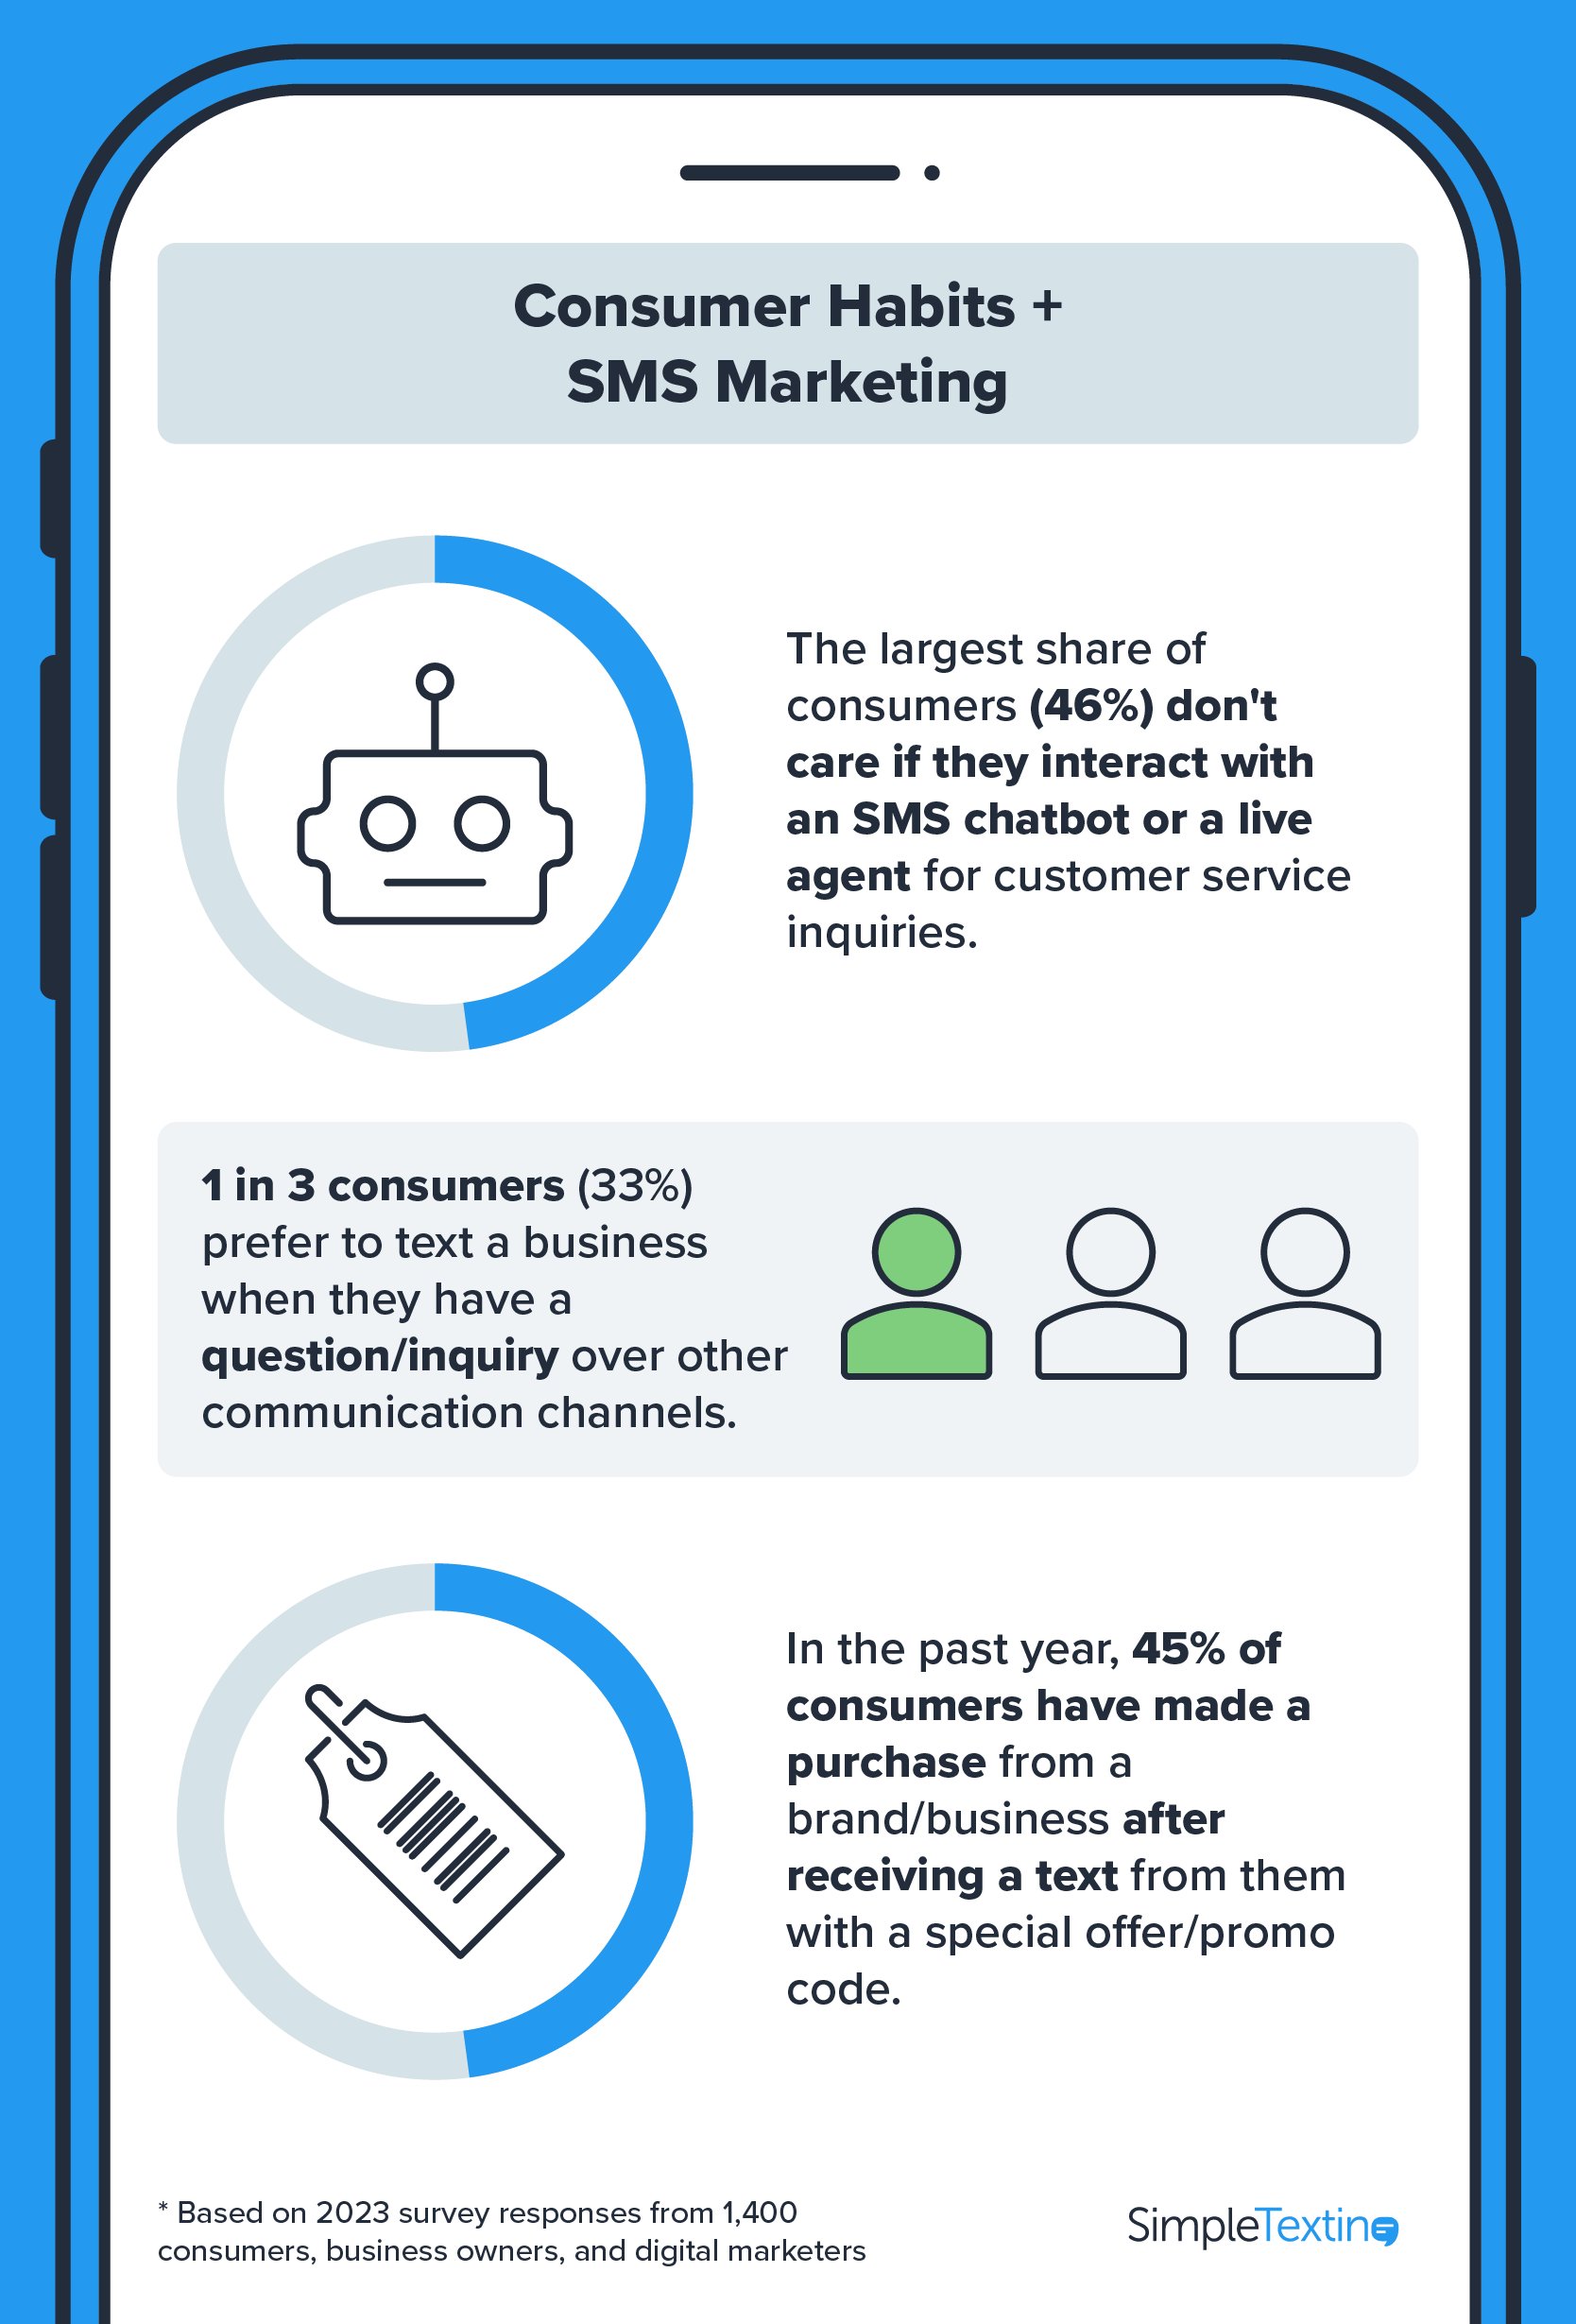 an infographic showing other consumer habits related to SMS marketing